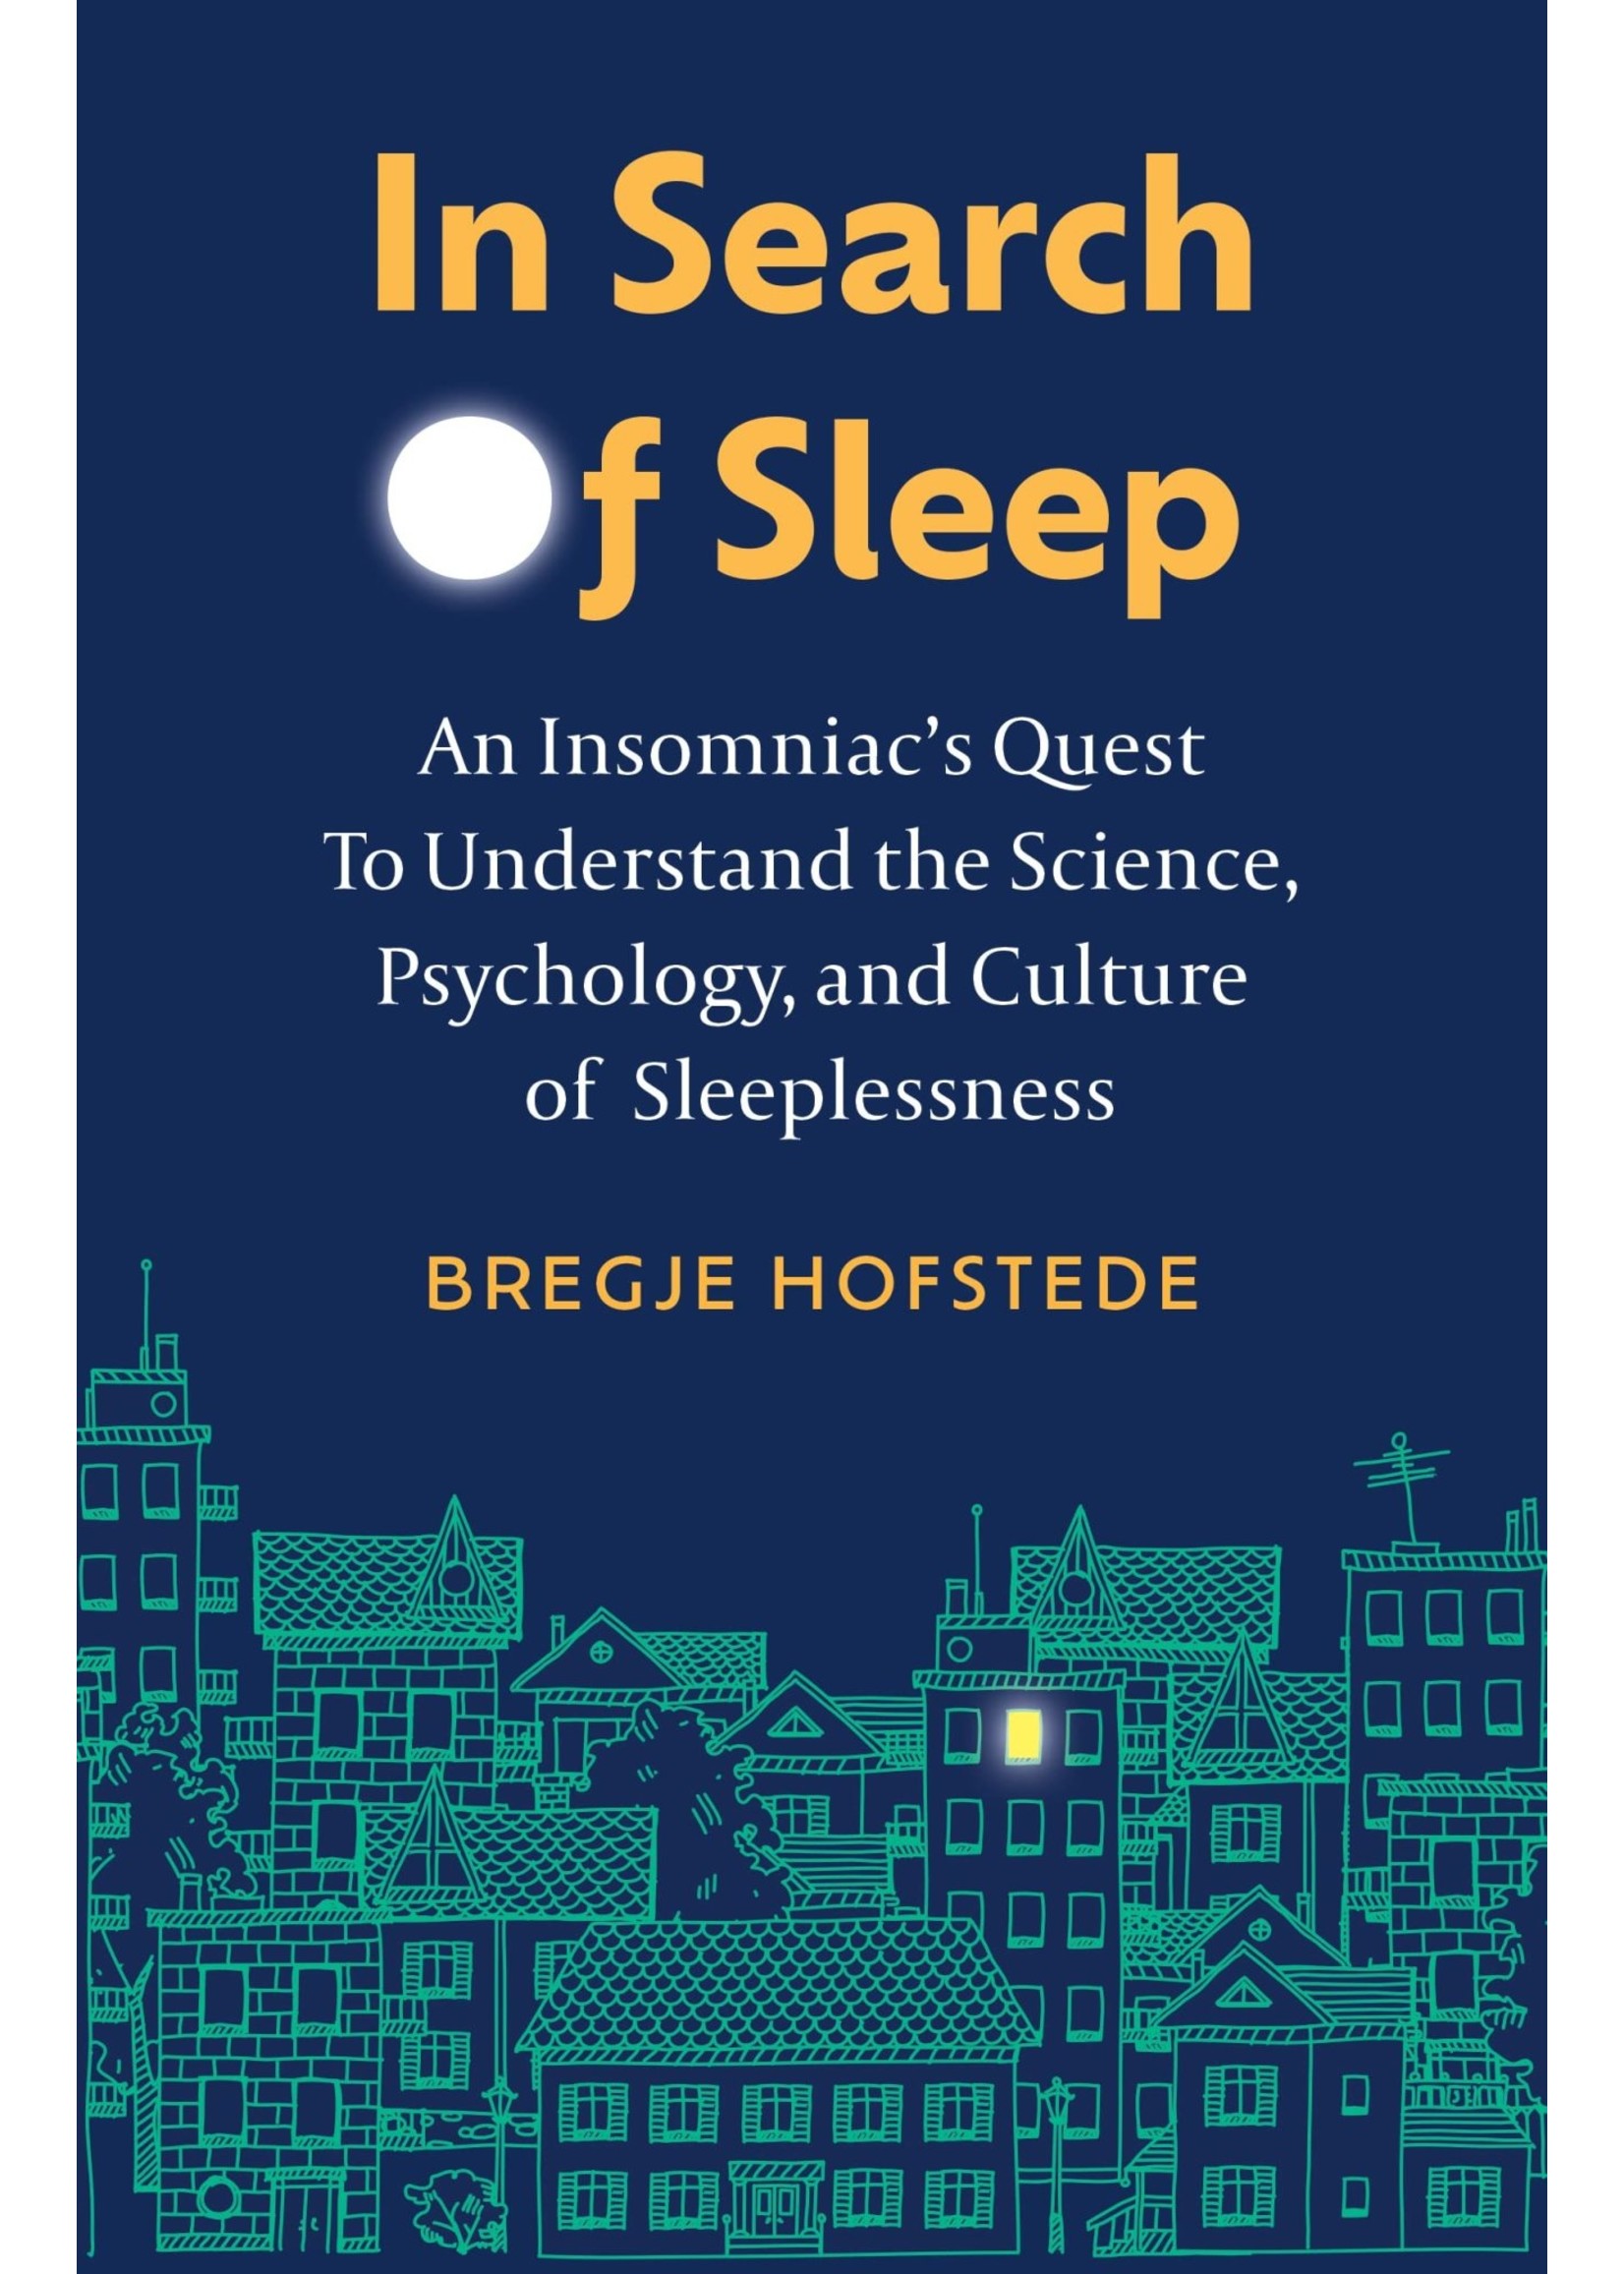 In Search of Sleep: An Insomniac's Quest to Understand the Science, Psychology, and Culture of Sleeplessness by Bregje Hofstede